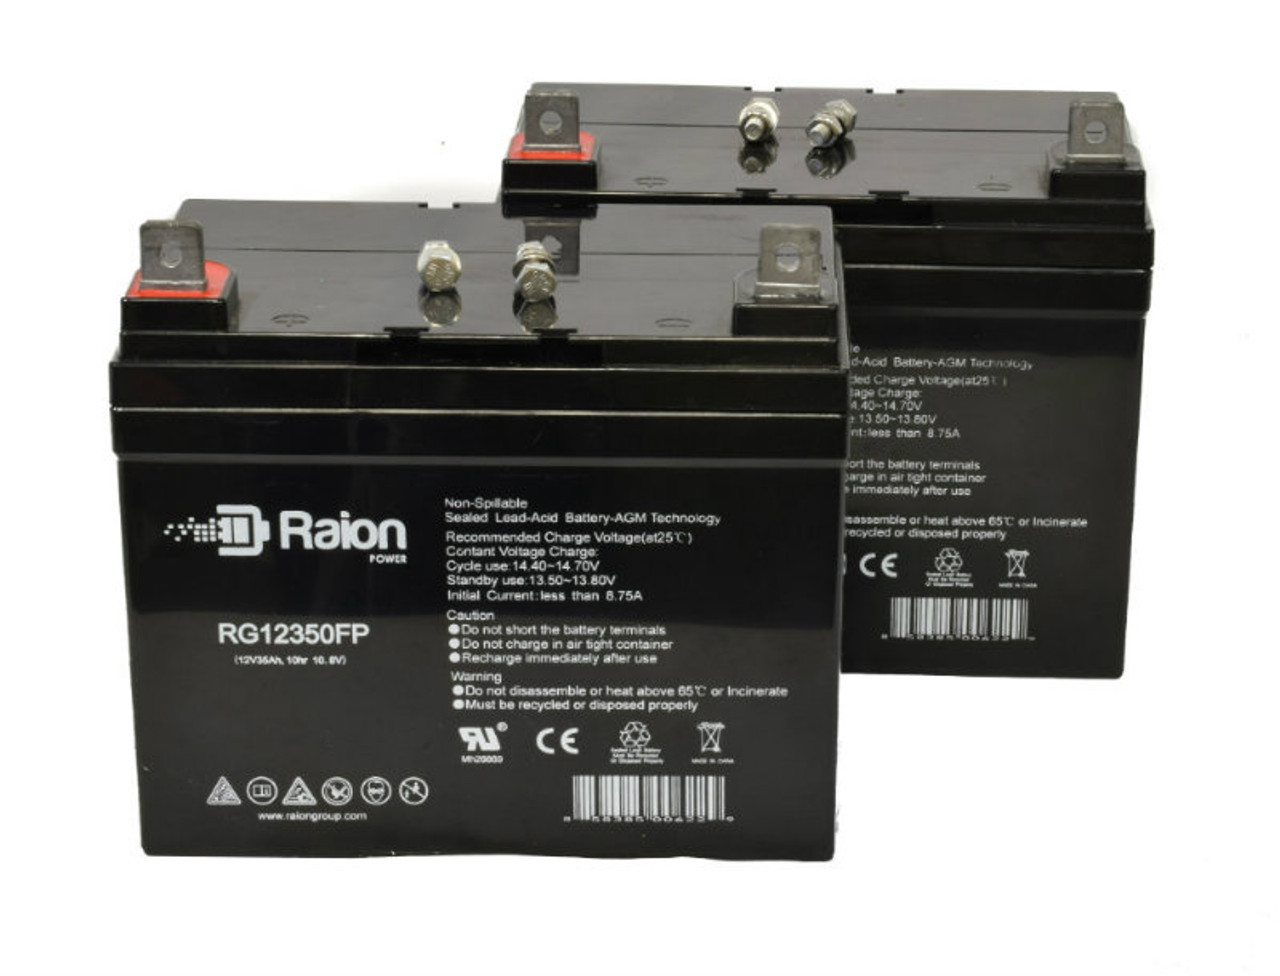 Raion Power Replacement 12V 35Ah Lawn Mower Battery for Lawn-Boy 9368E - 2 Pack